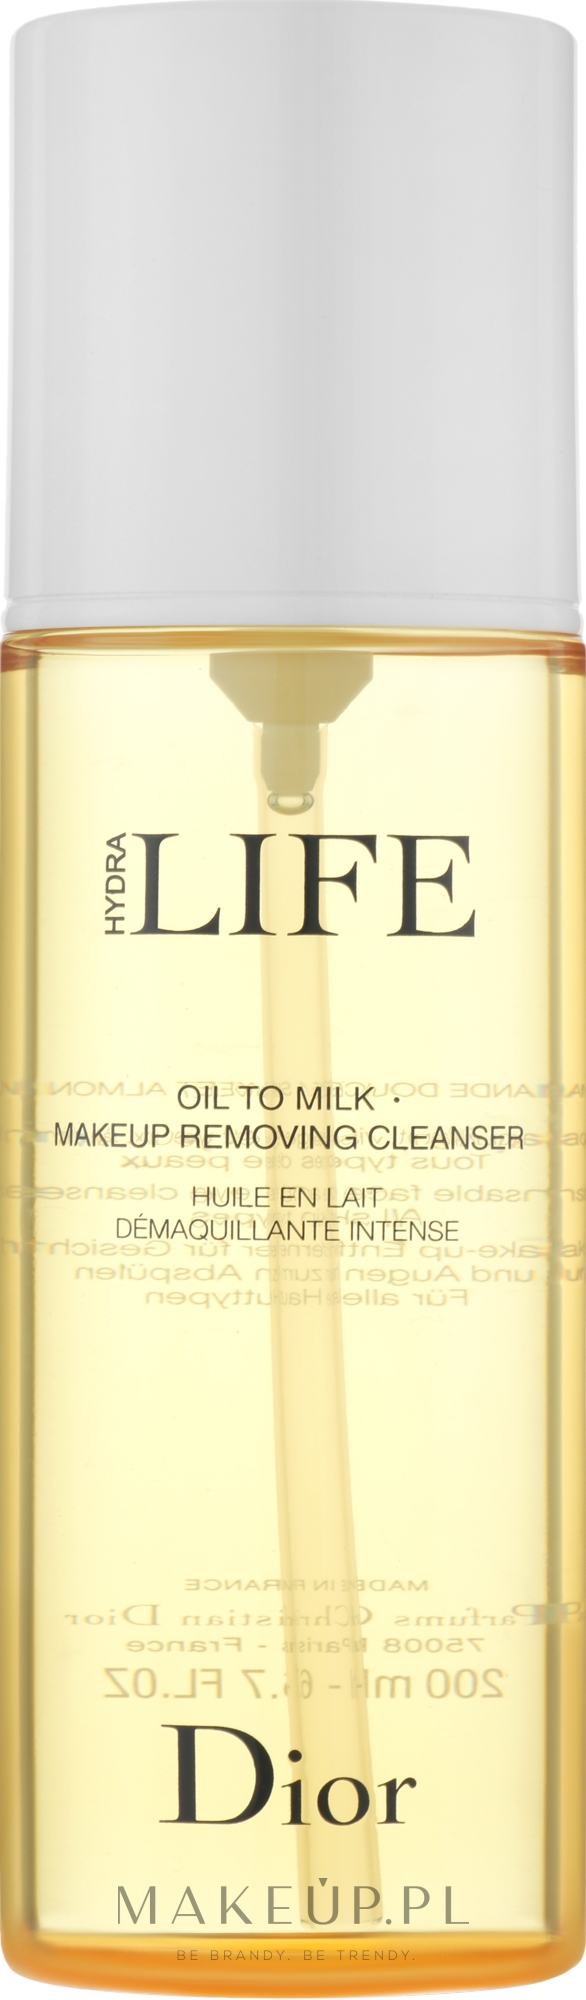 DIOR Hydra Life Oil to Milk Makeup Removing Cleanser 200ml  Harrods US